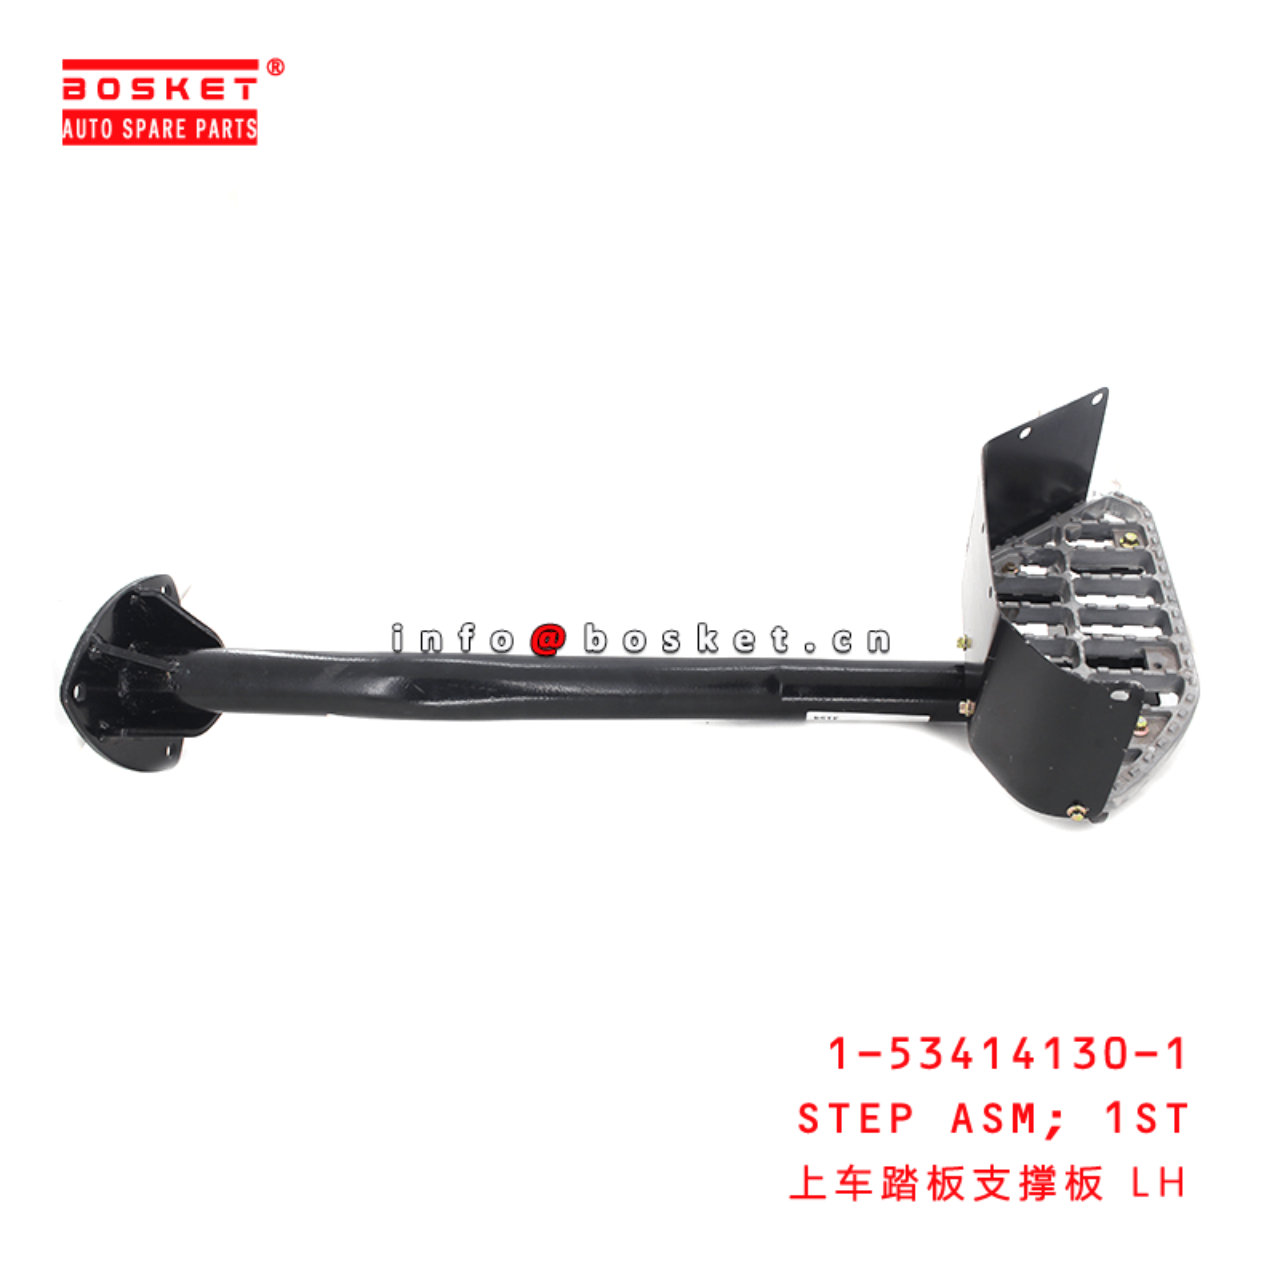  1-53414130-1 First Step Assembly 1534141301 Suitable for ISUZU FVR34 